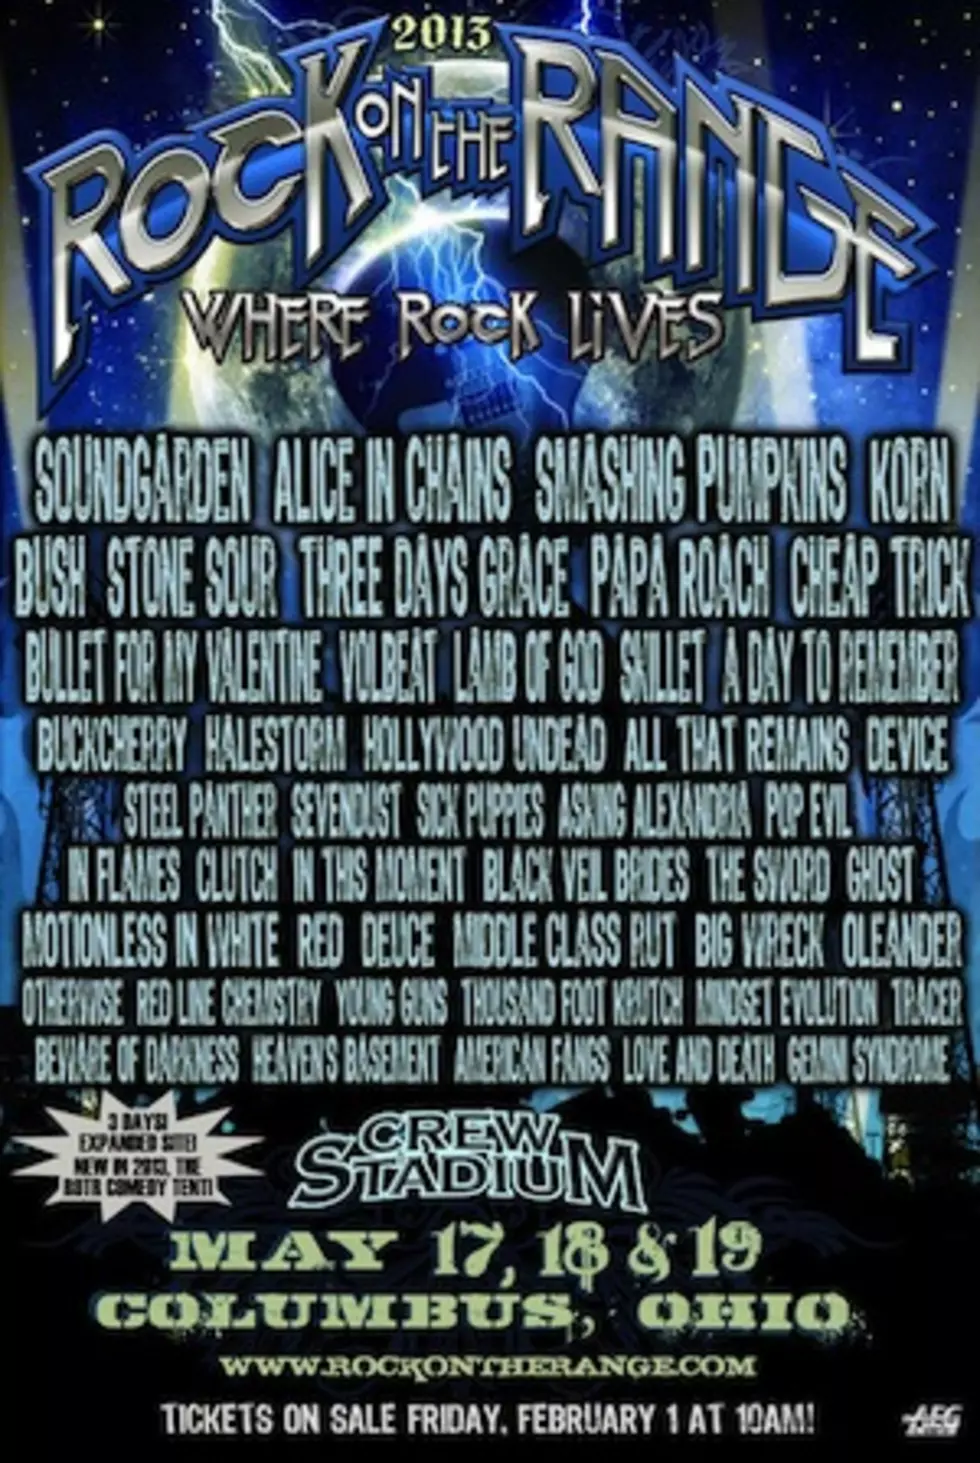 2013 Rock on the Range to Feature Soundgarden, Alice in Chains, Korn, Lamb of God + More